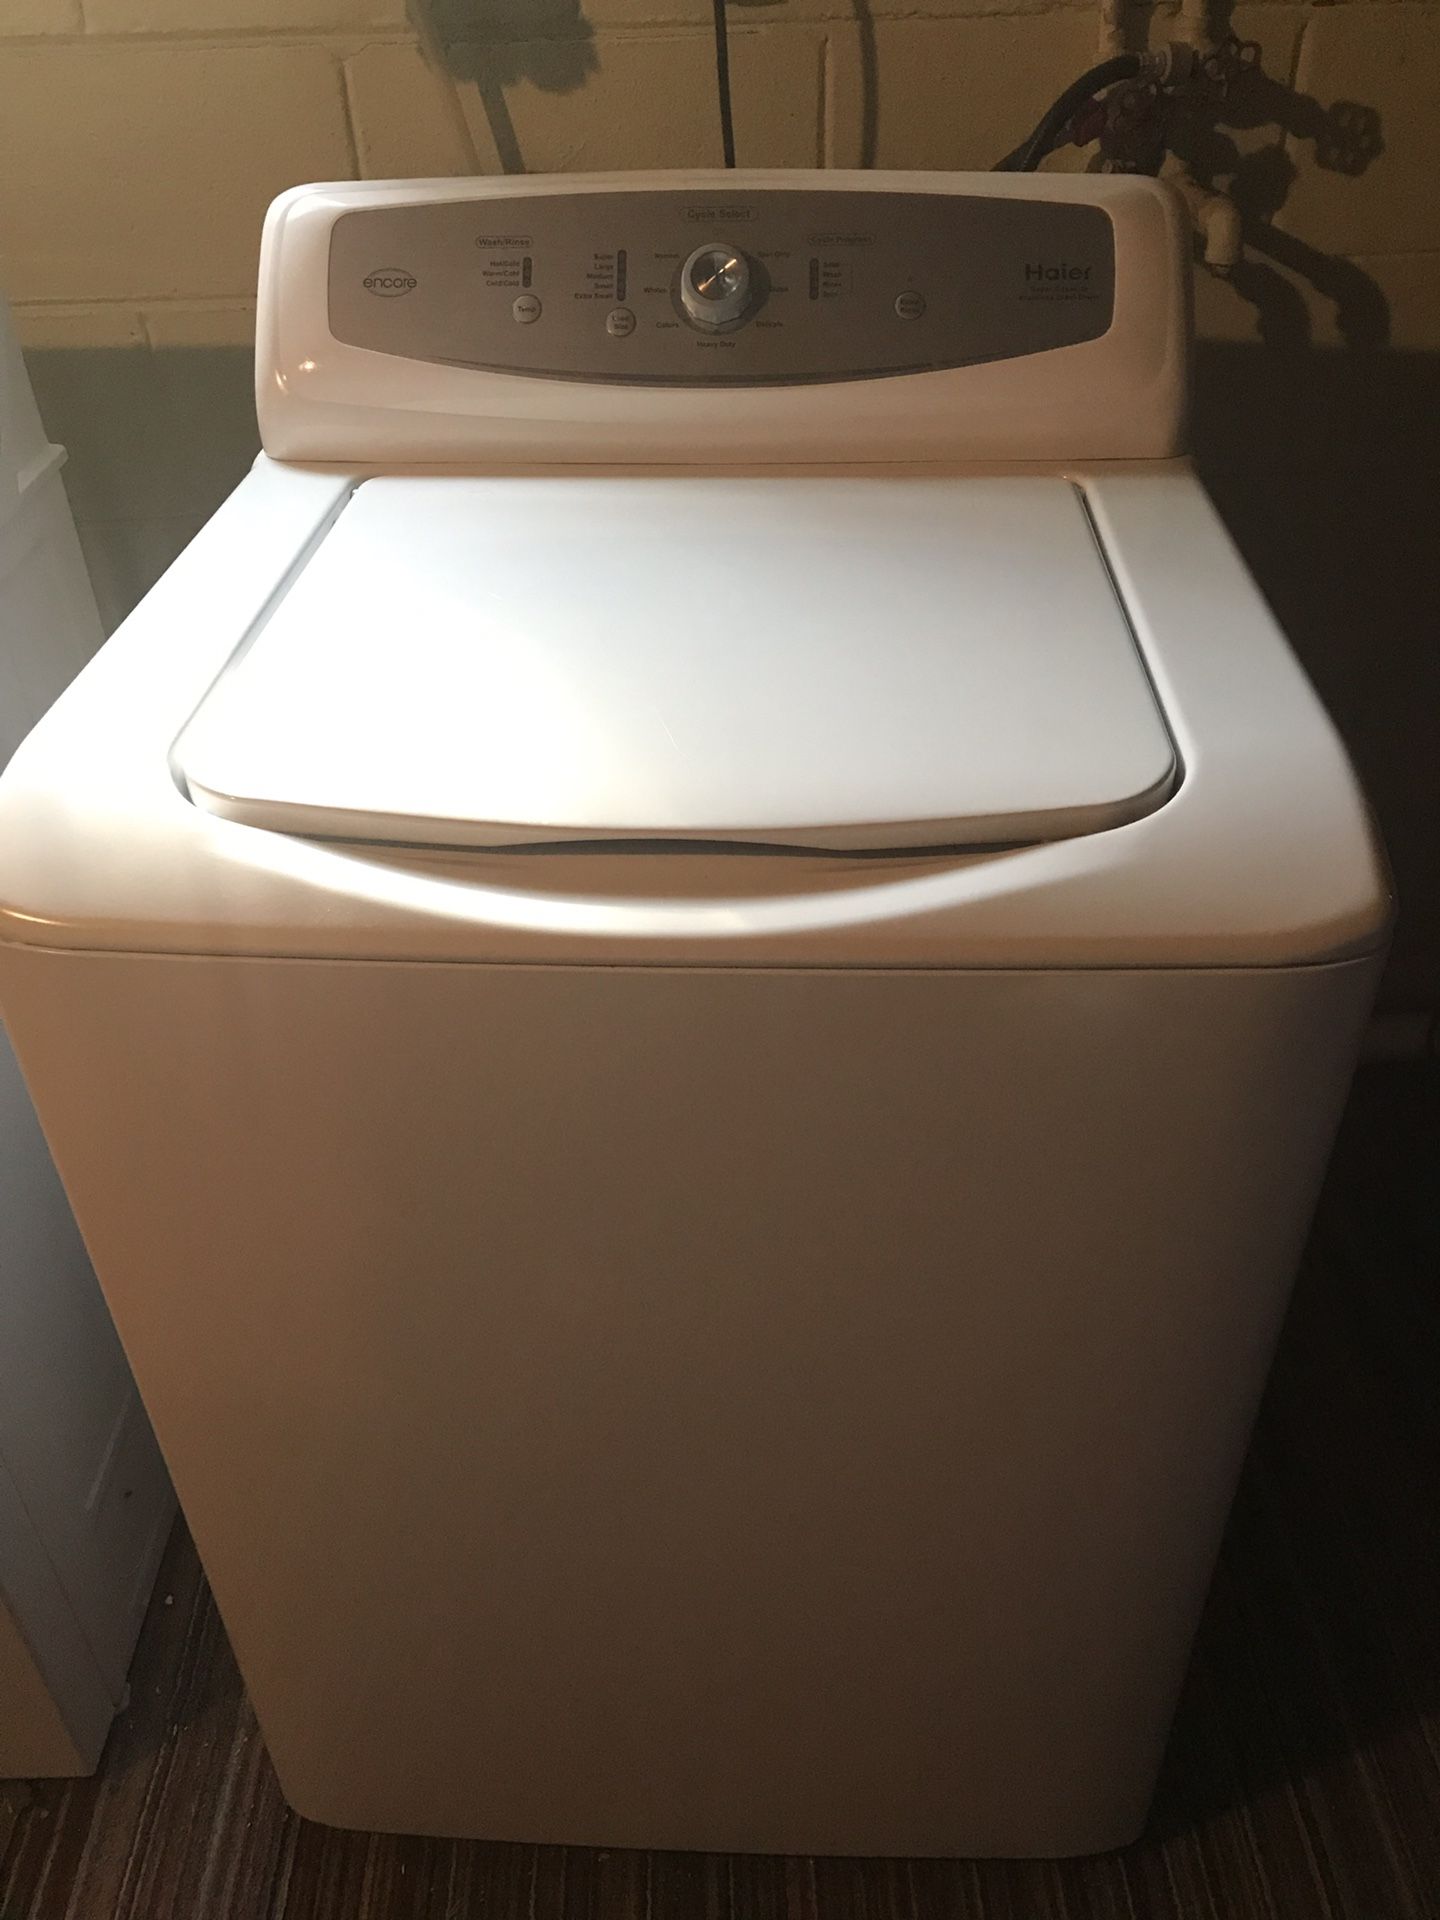 Haier Encore Washer (electric)